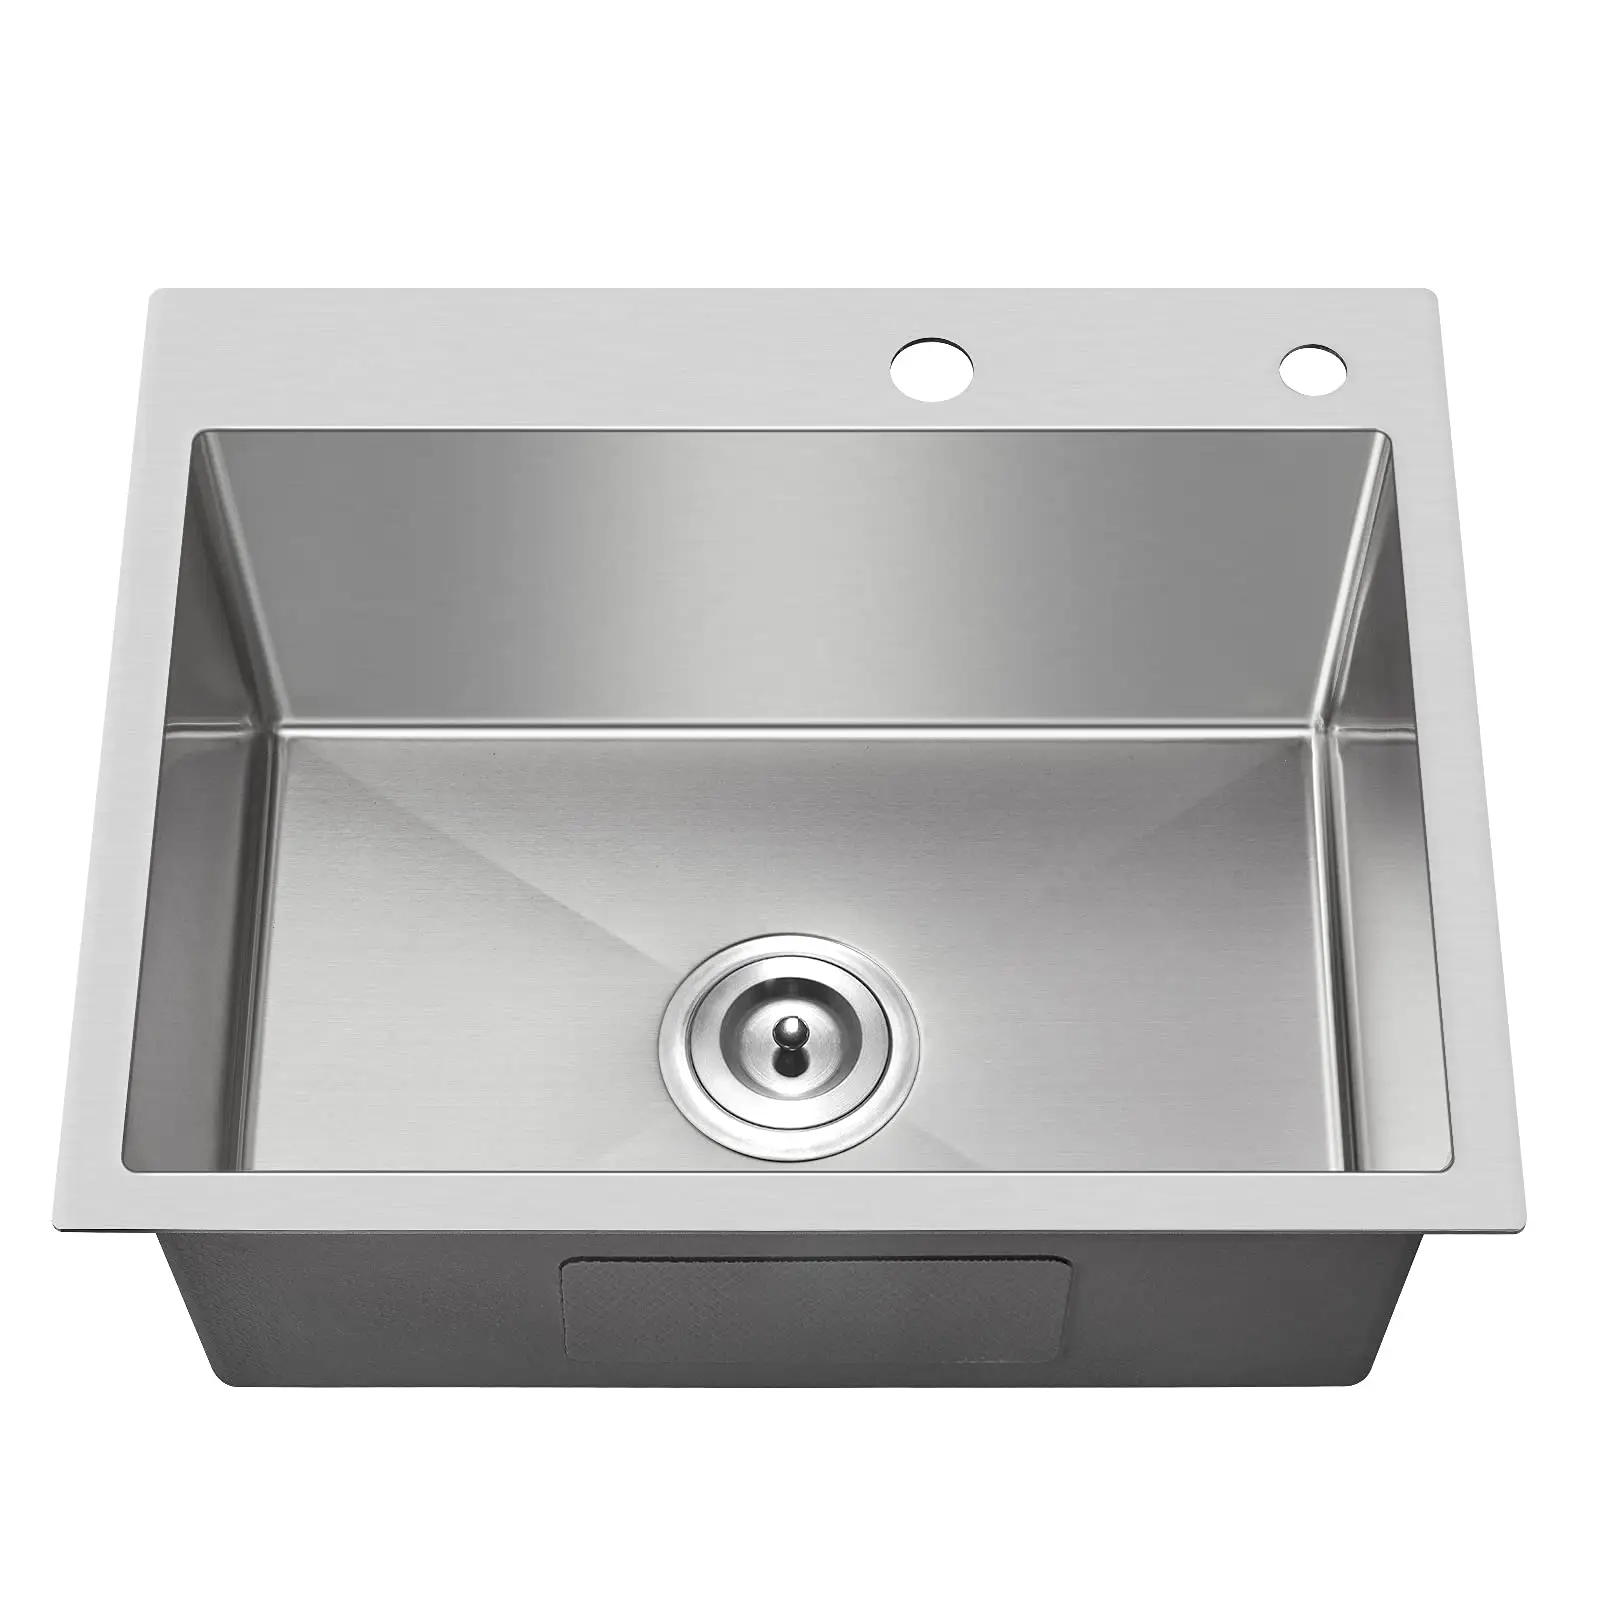 24*18 inch Drop-in Handmade Stainless Steel Kitchen Sink Black, Over mount Single Bowl, Top mount Kitchen Sink with Drain